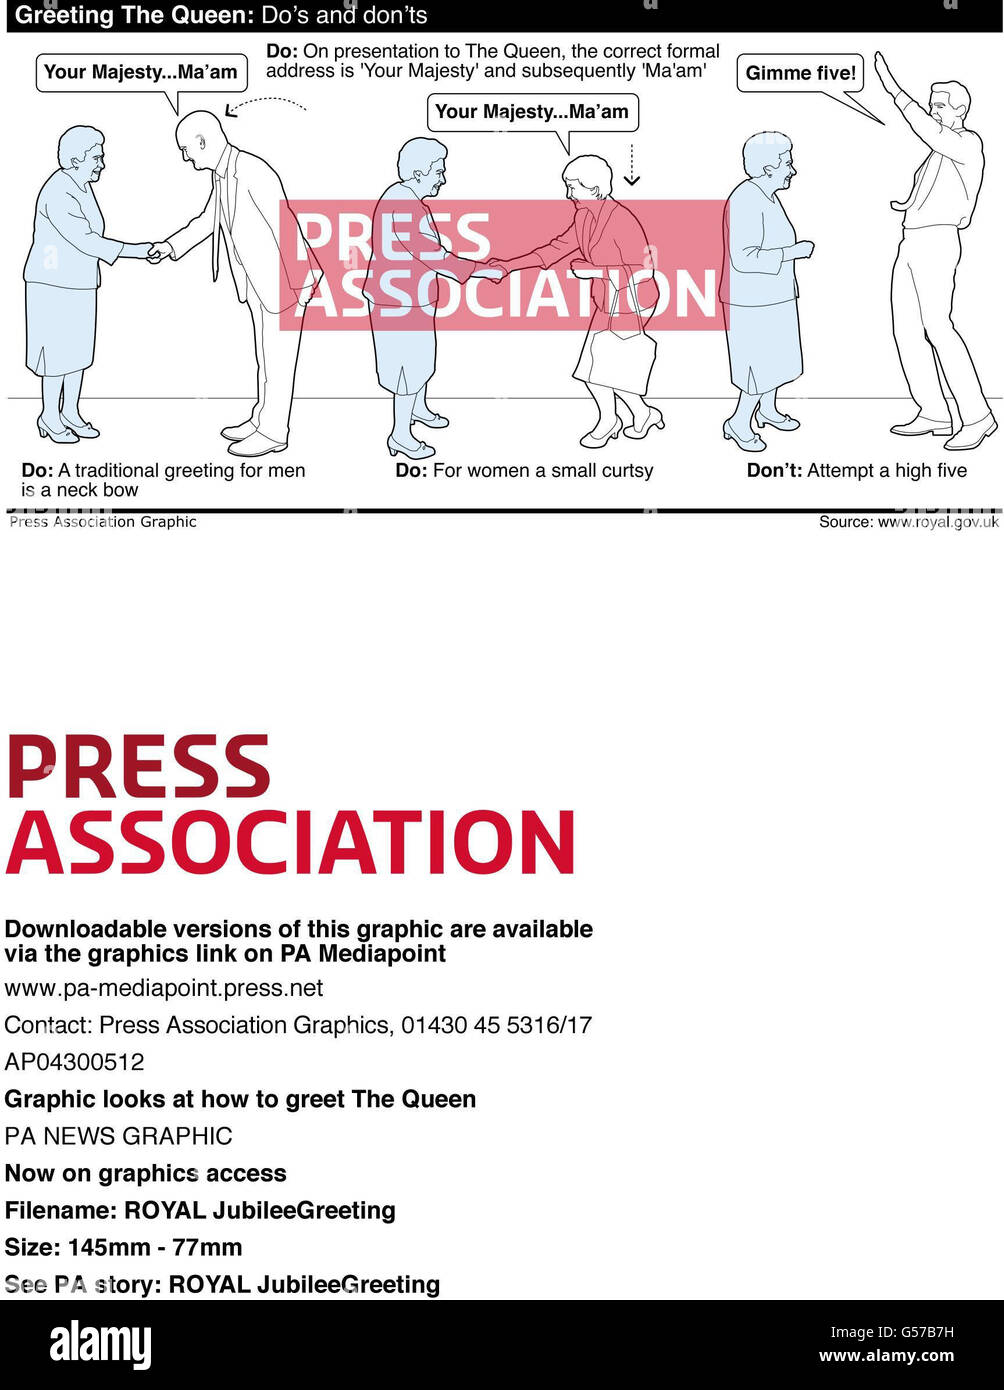 ROYAL Jubilee. Graphic looks at how to greet The Queen Stock Photo